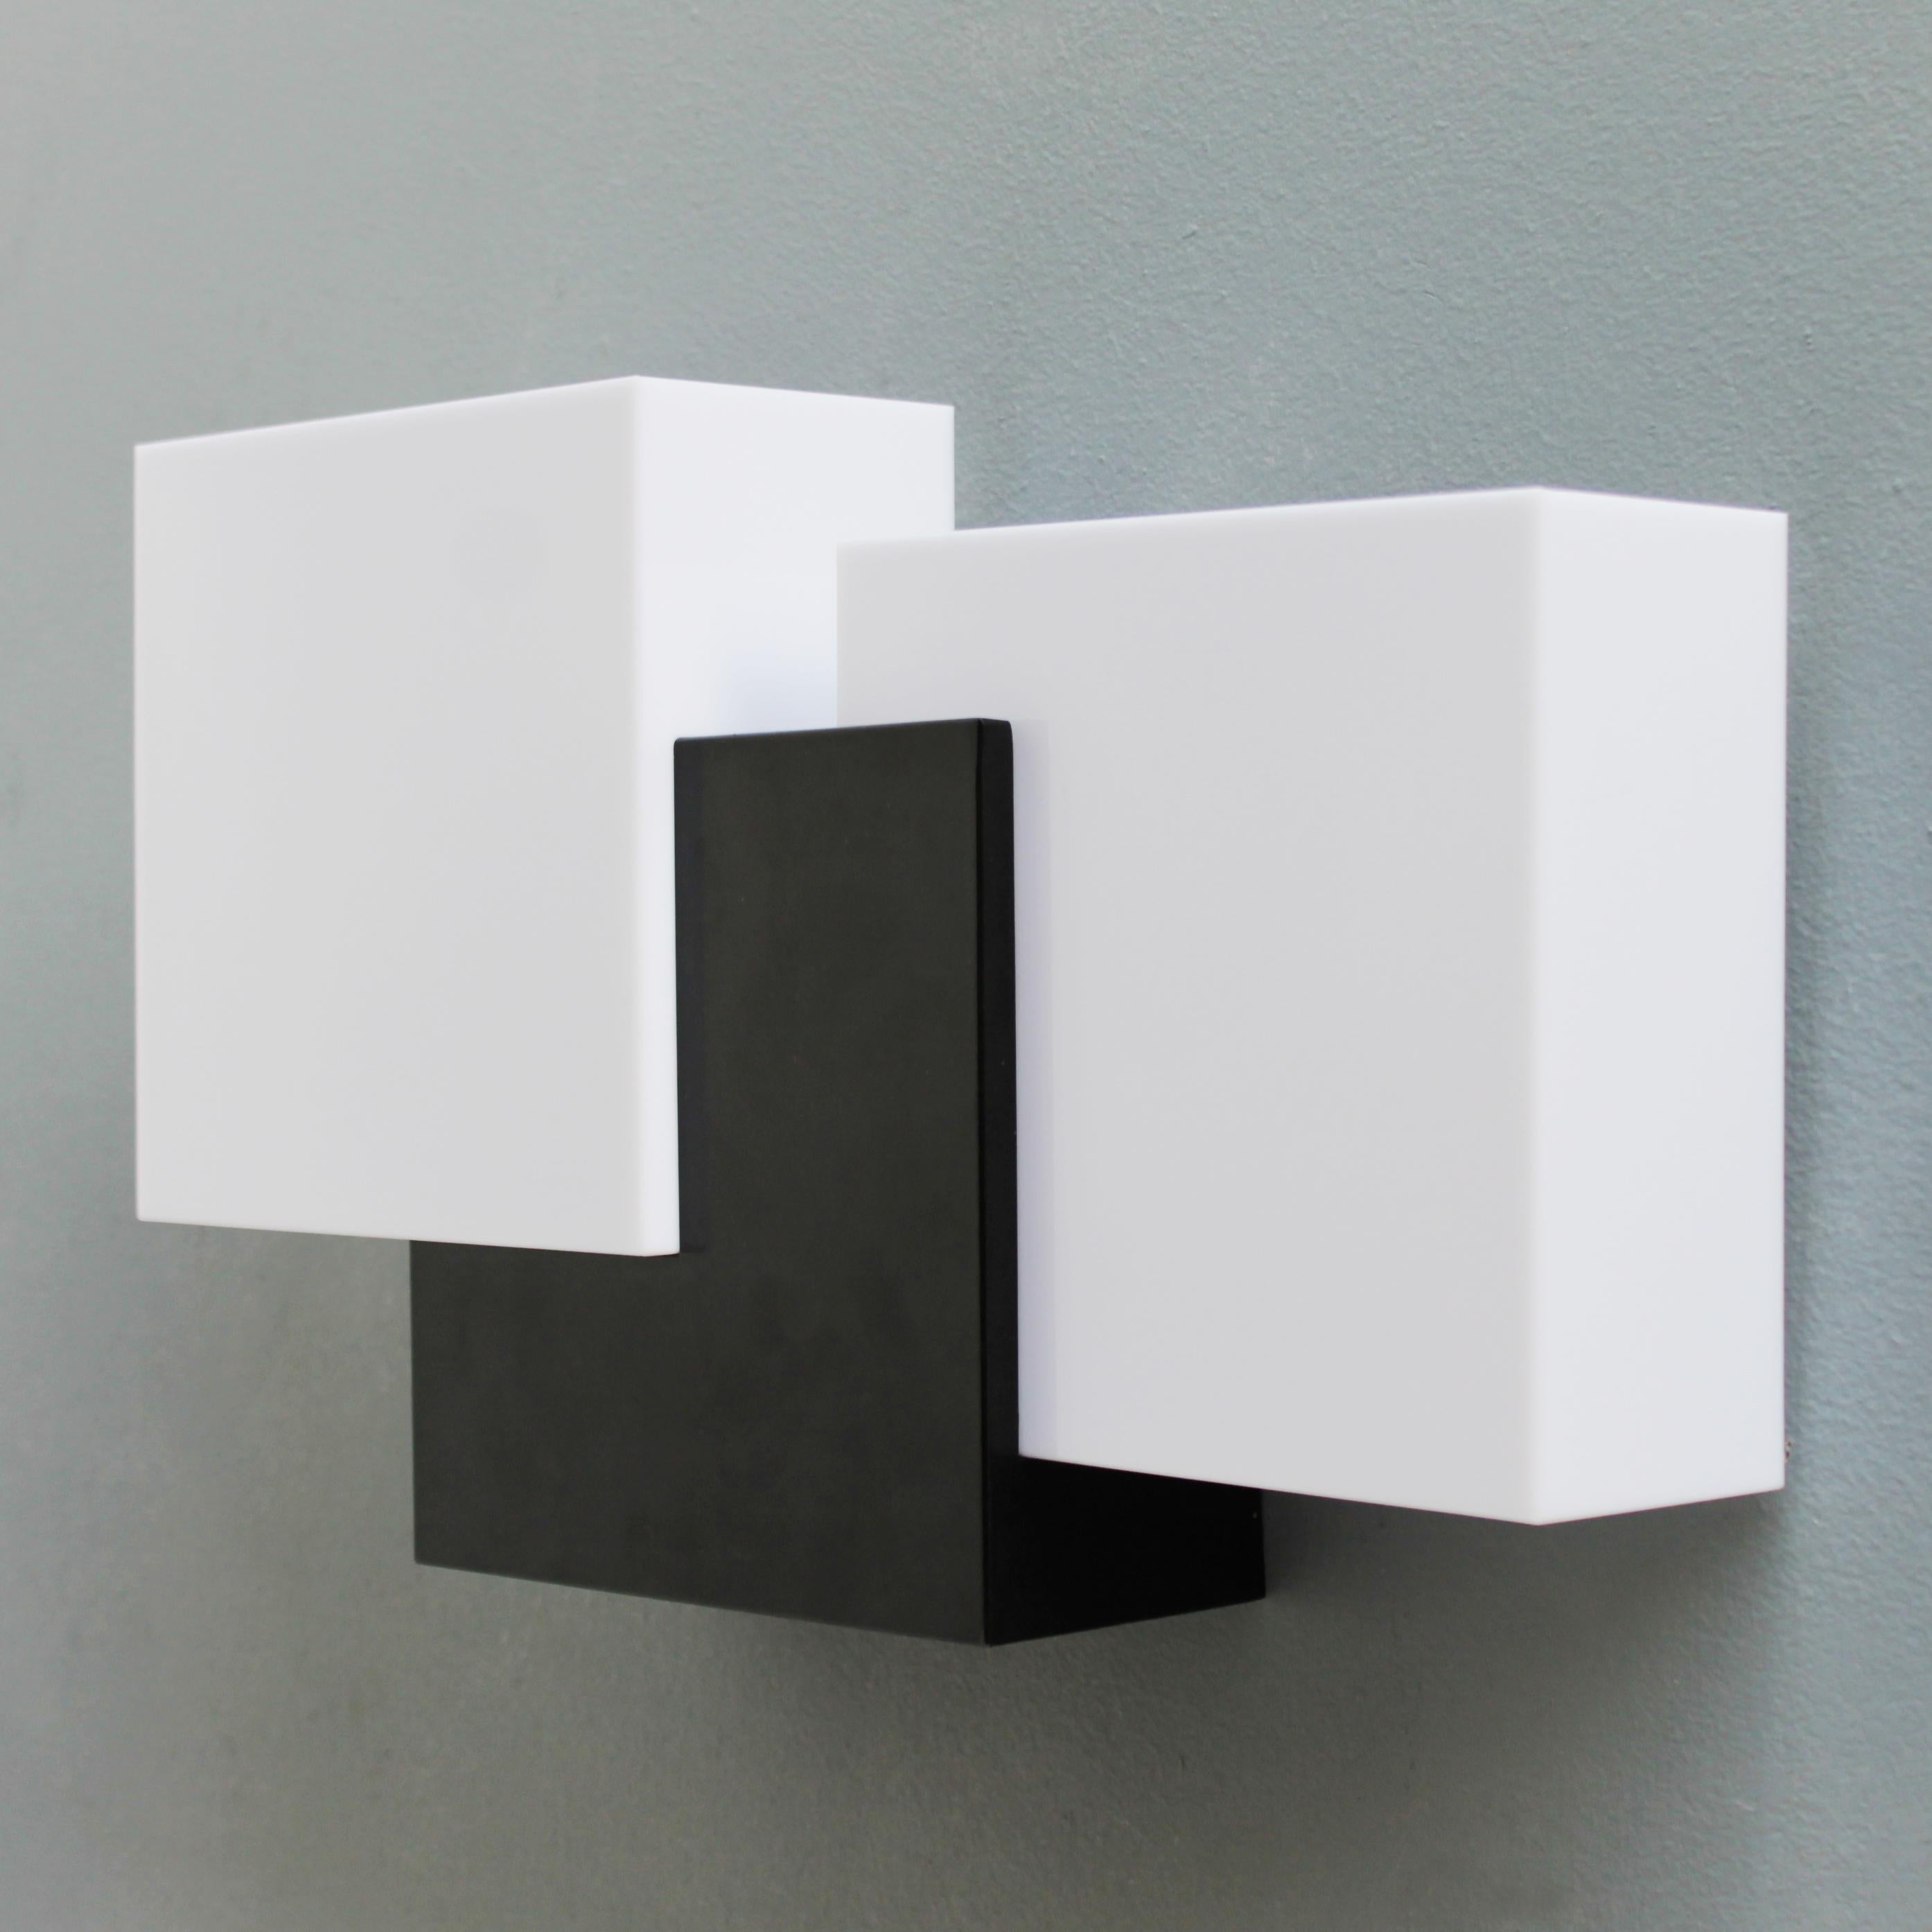 Rare sculptural modernist wall lamp attributed to Maison Arlus, manufactured in the late 1950s in France. Two acrylic light boxes and a black lacquered metal fixture in a sculptural setting. 
The electrical parts have been renewed as well as the